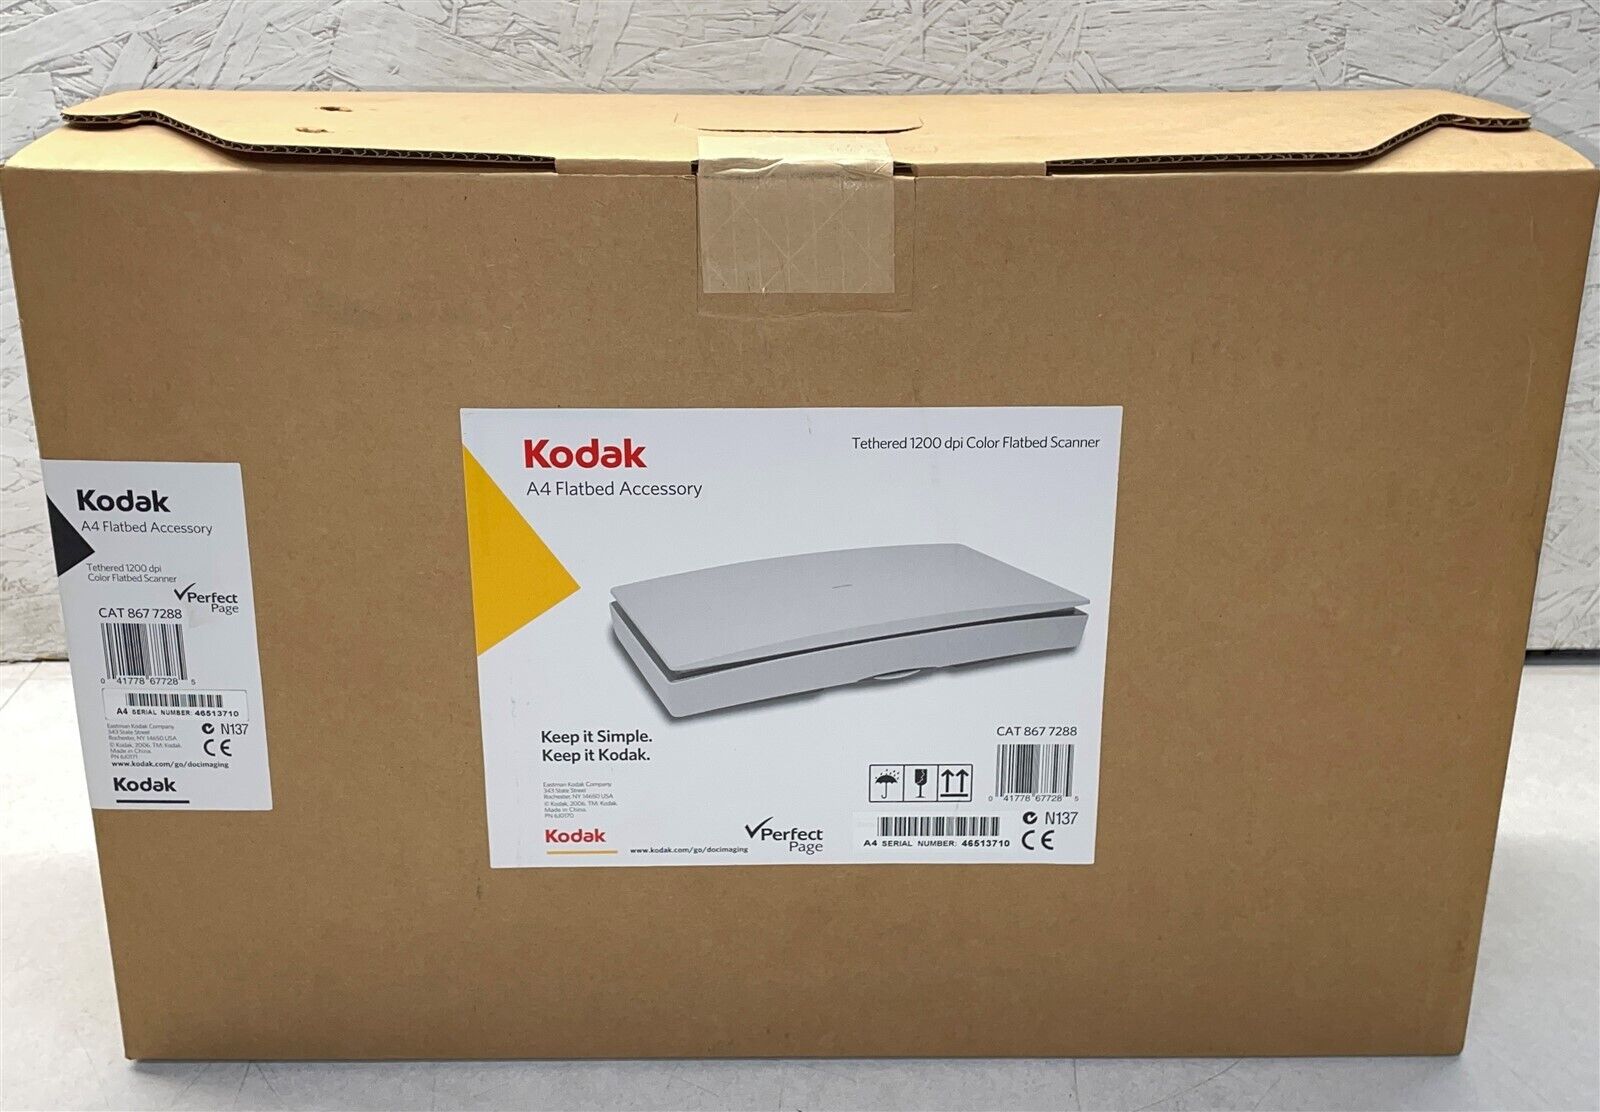 KODAK A4 FLATBED ACCESSORY TETHERED 1200 dpi COLOR FLATBED SCANNER NEW IN BOX